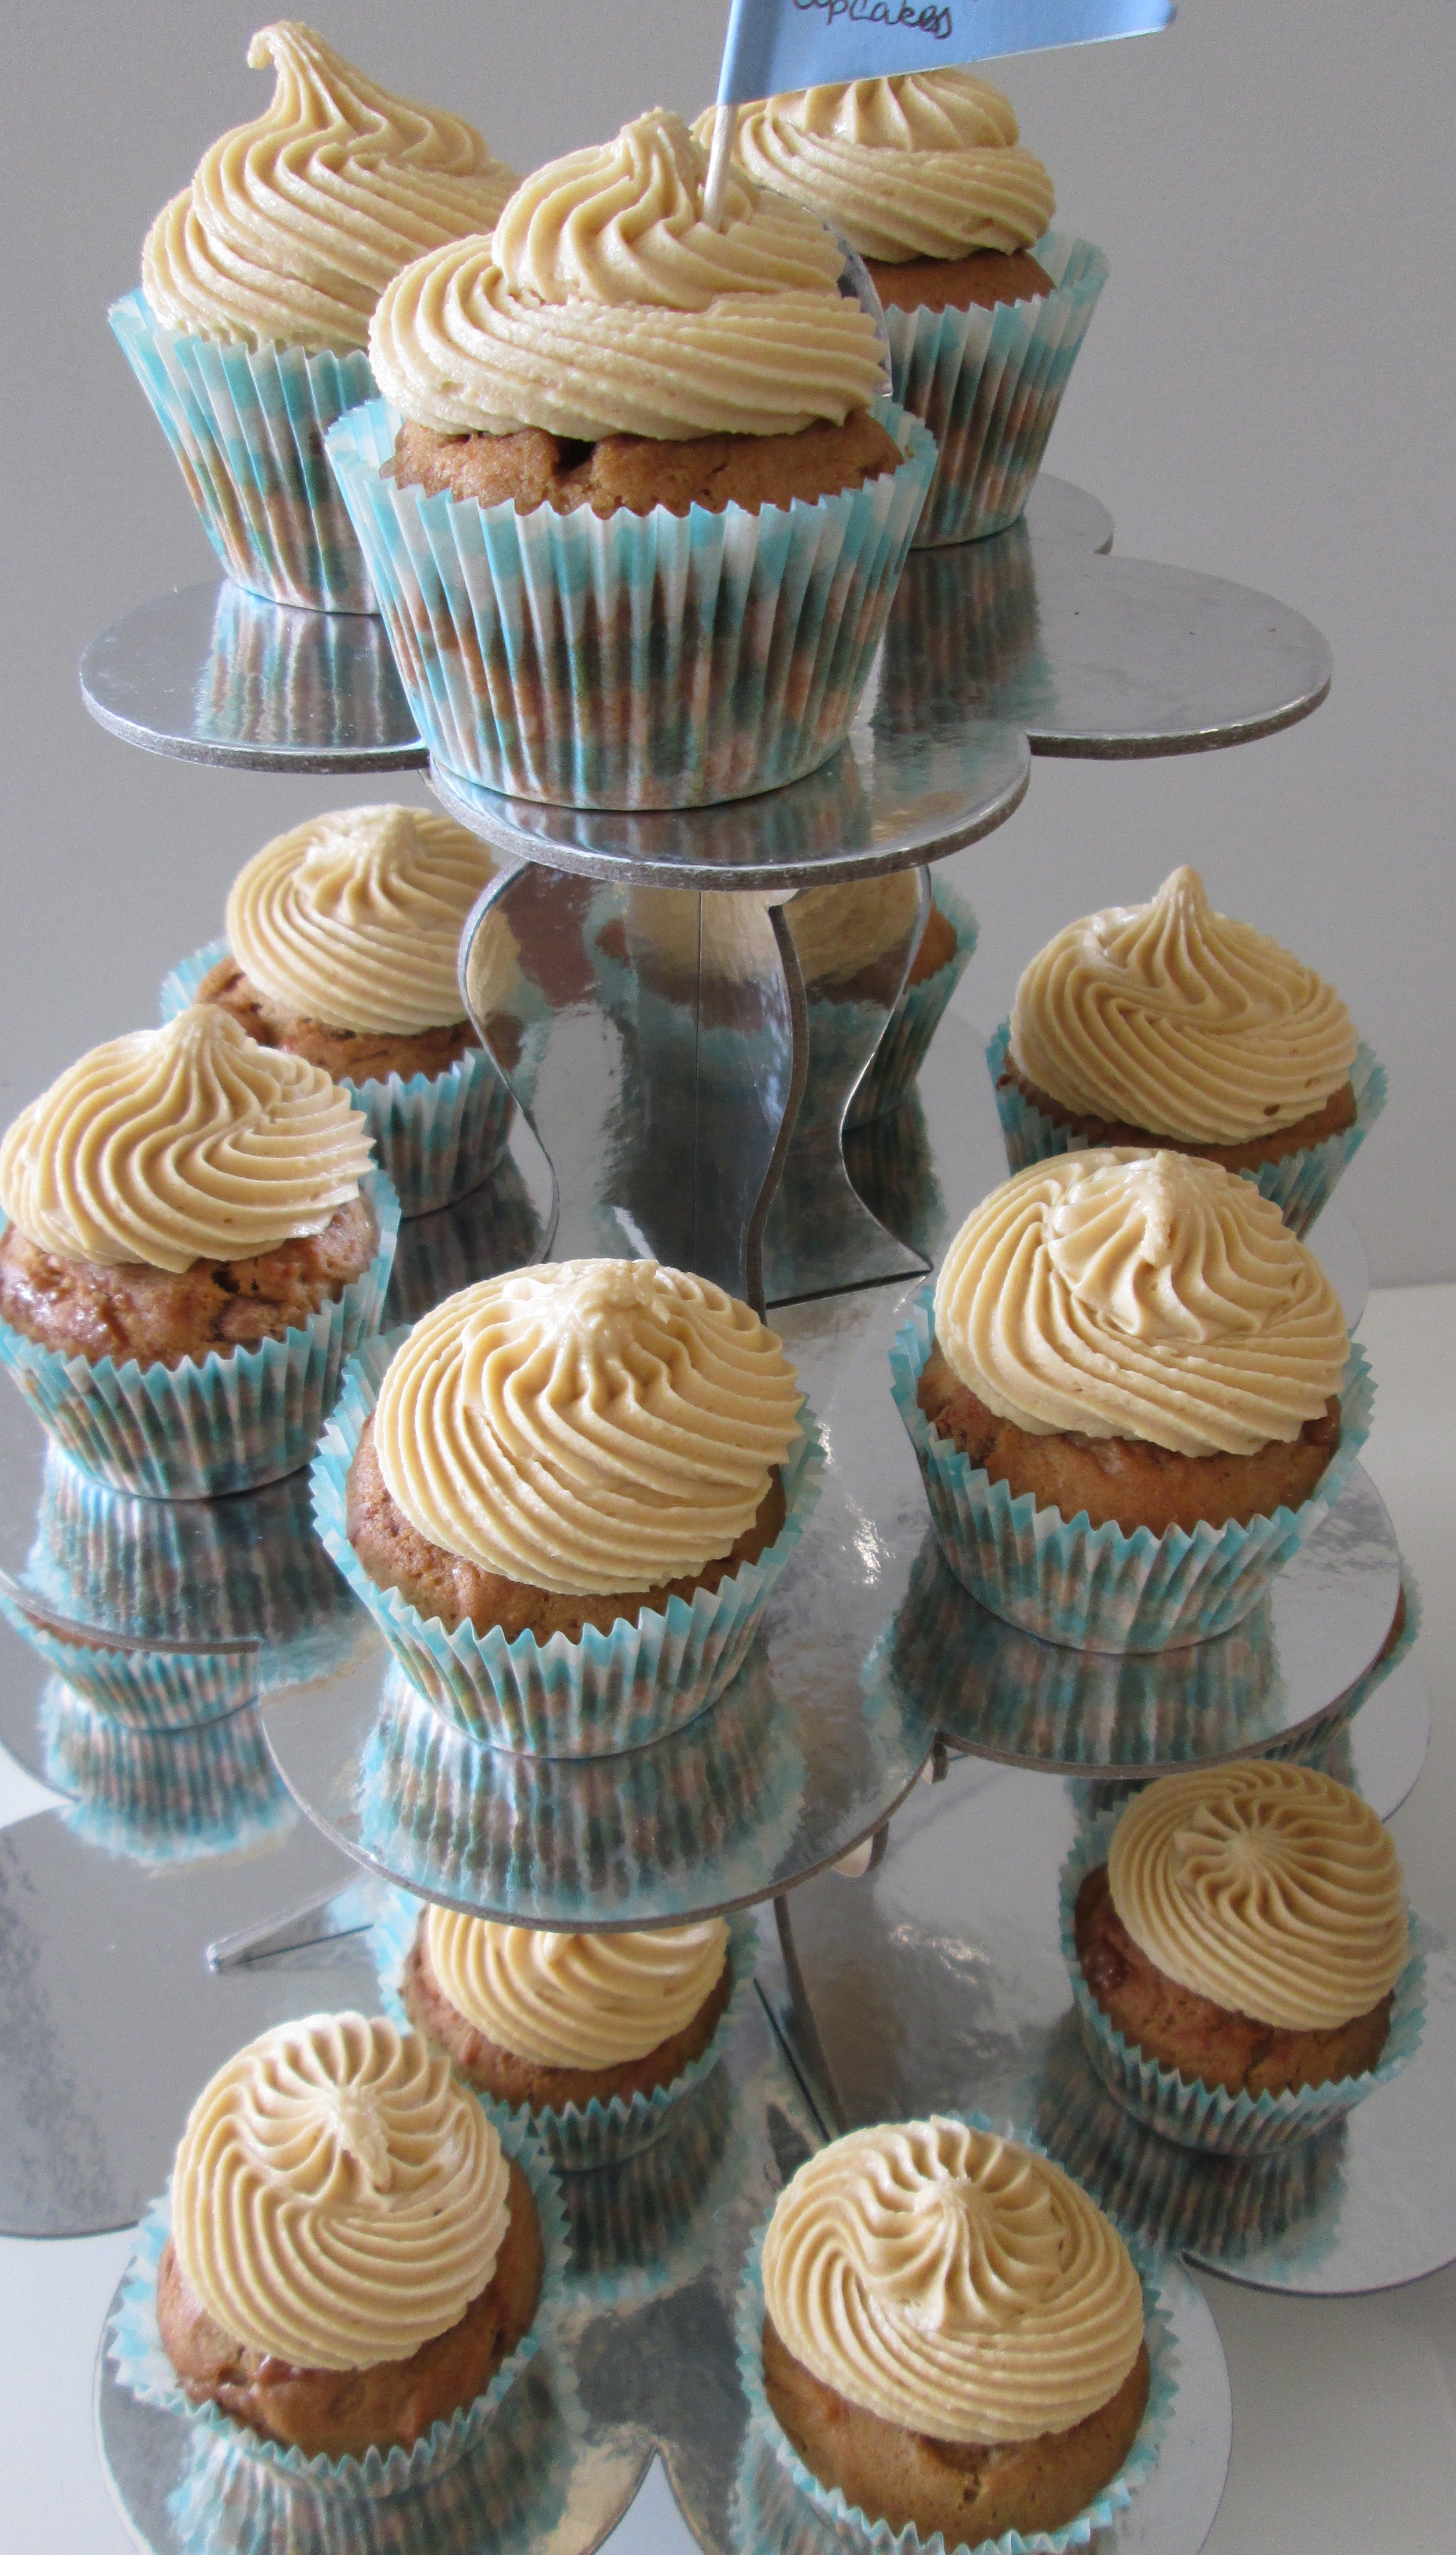 Salted Caramel Cupcakes - Katyanne - Recipes For Food Lovers Including ...